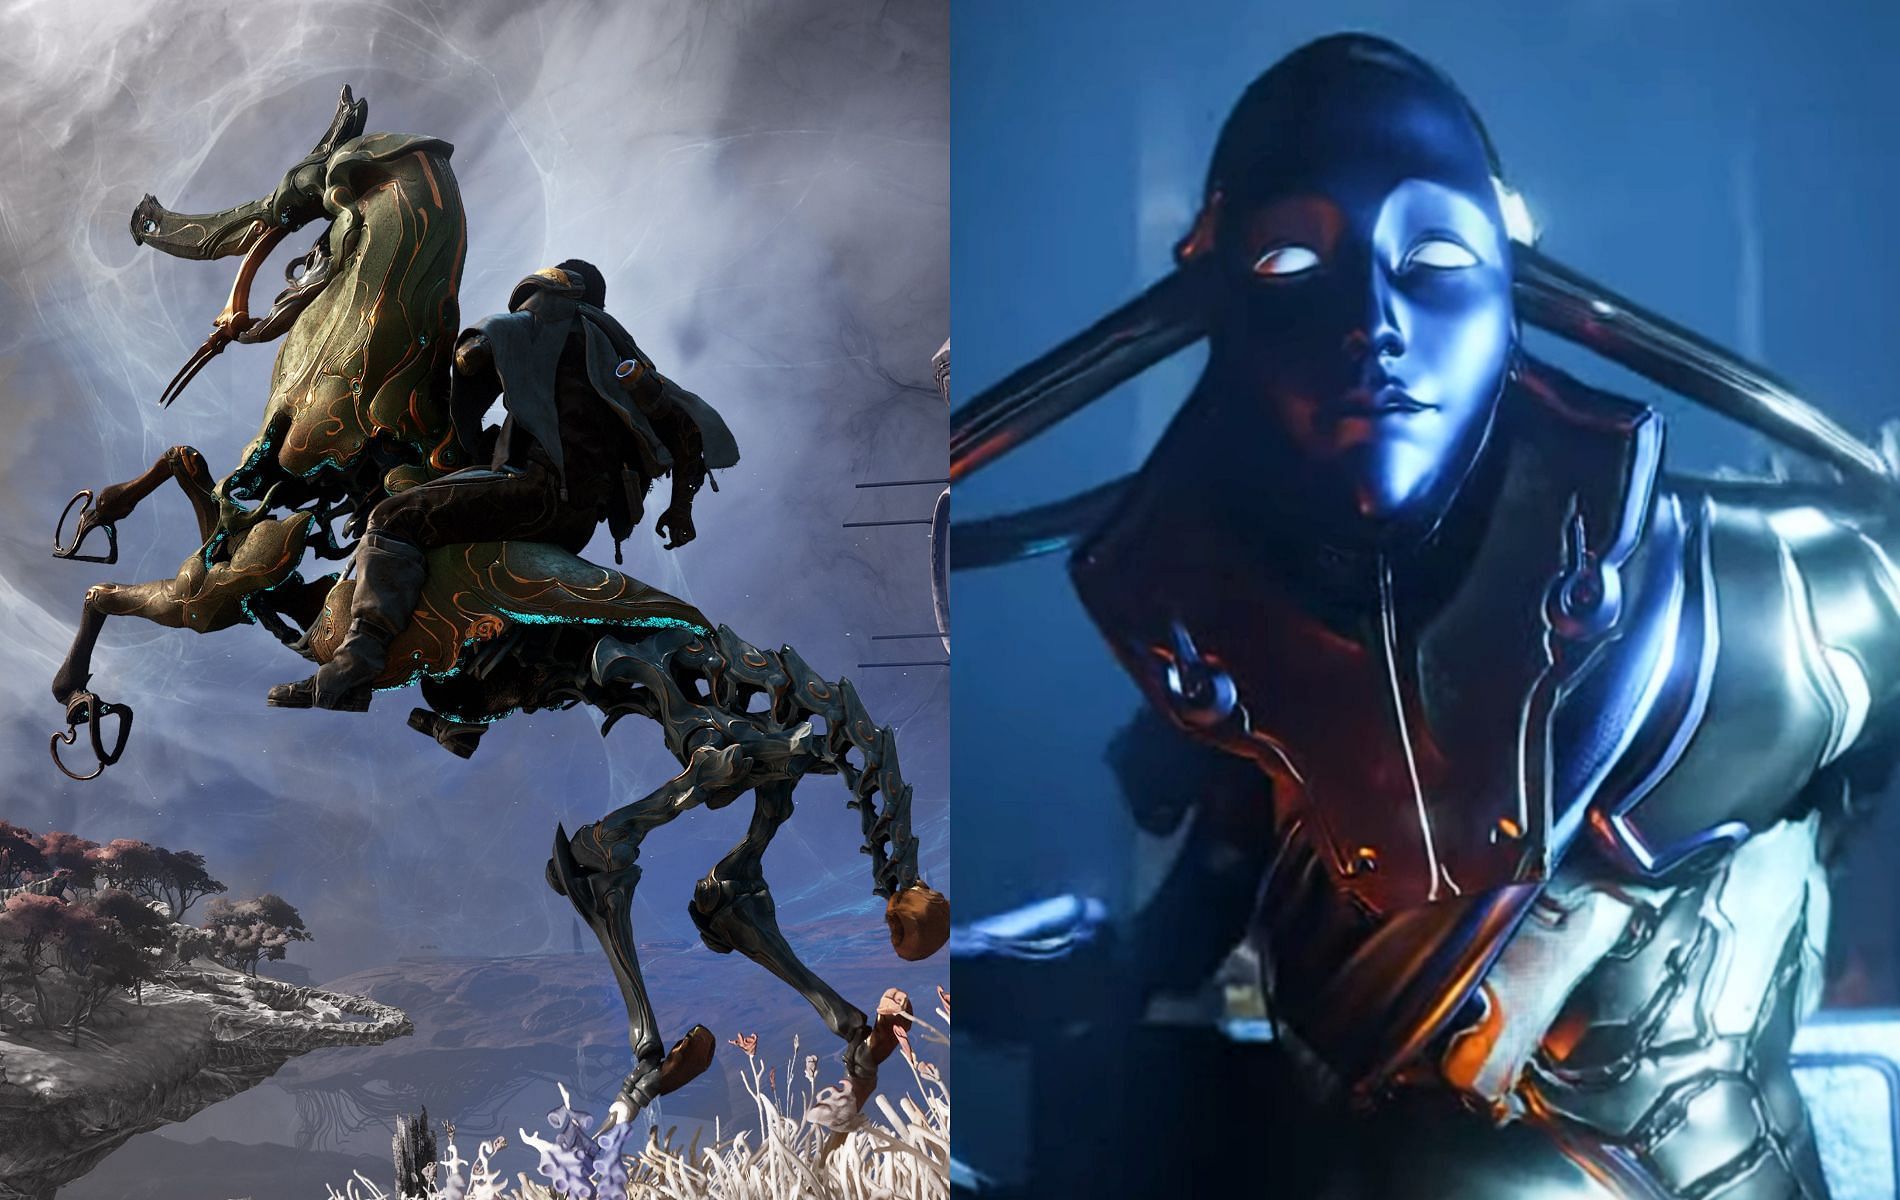 Are you excited about the future of the popular MMORPG Warframe? (Images via Digital Extremes)